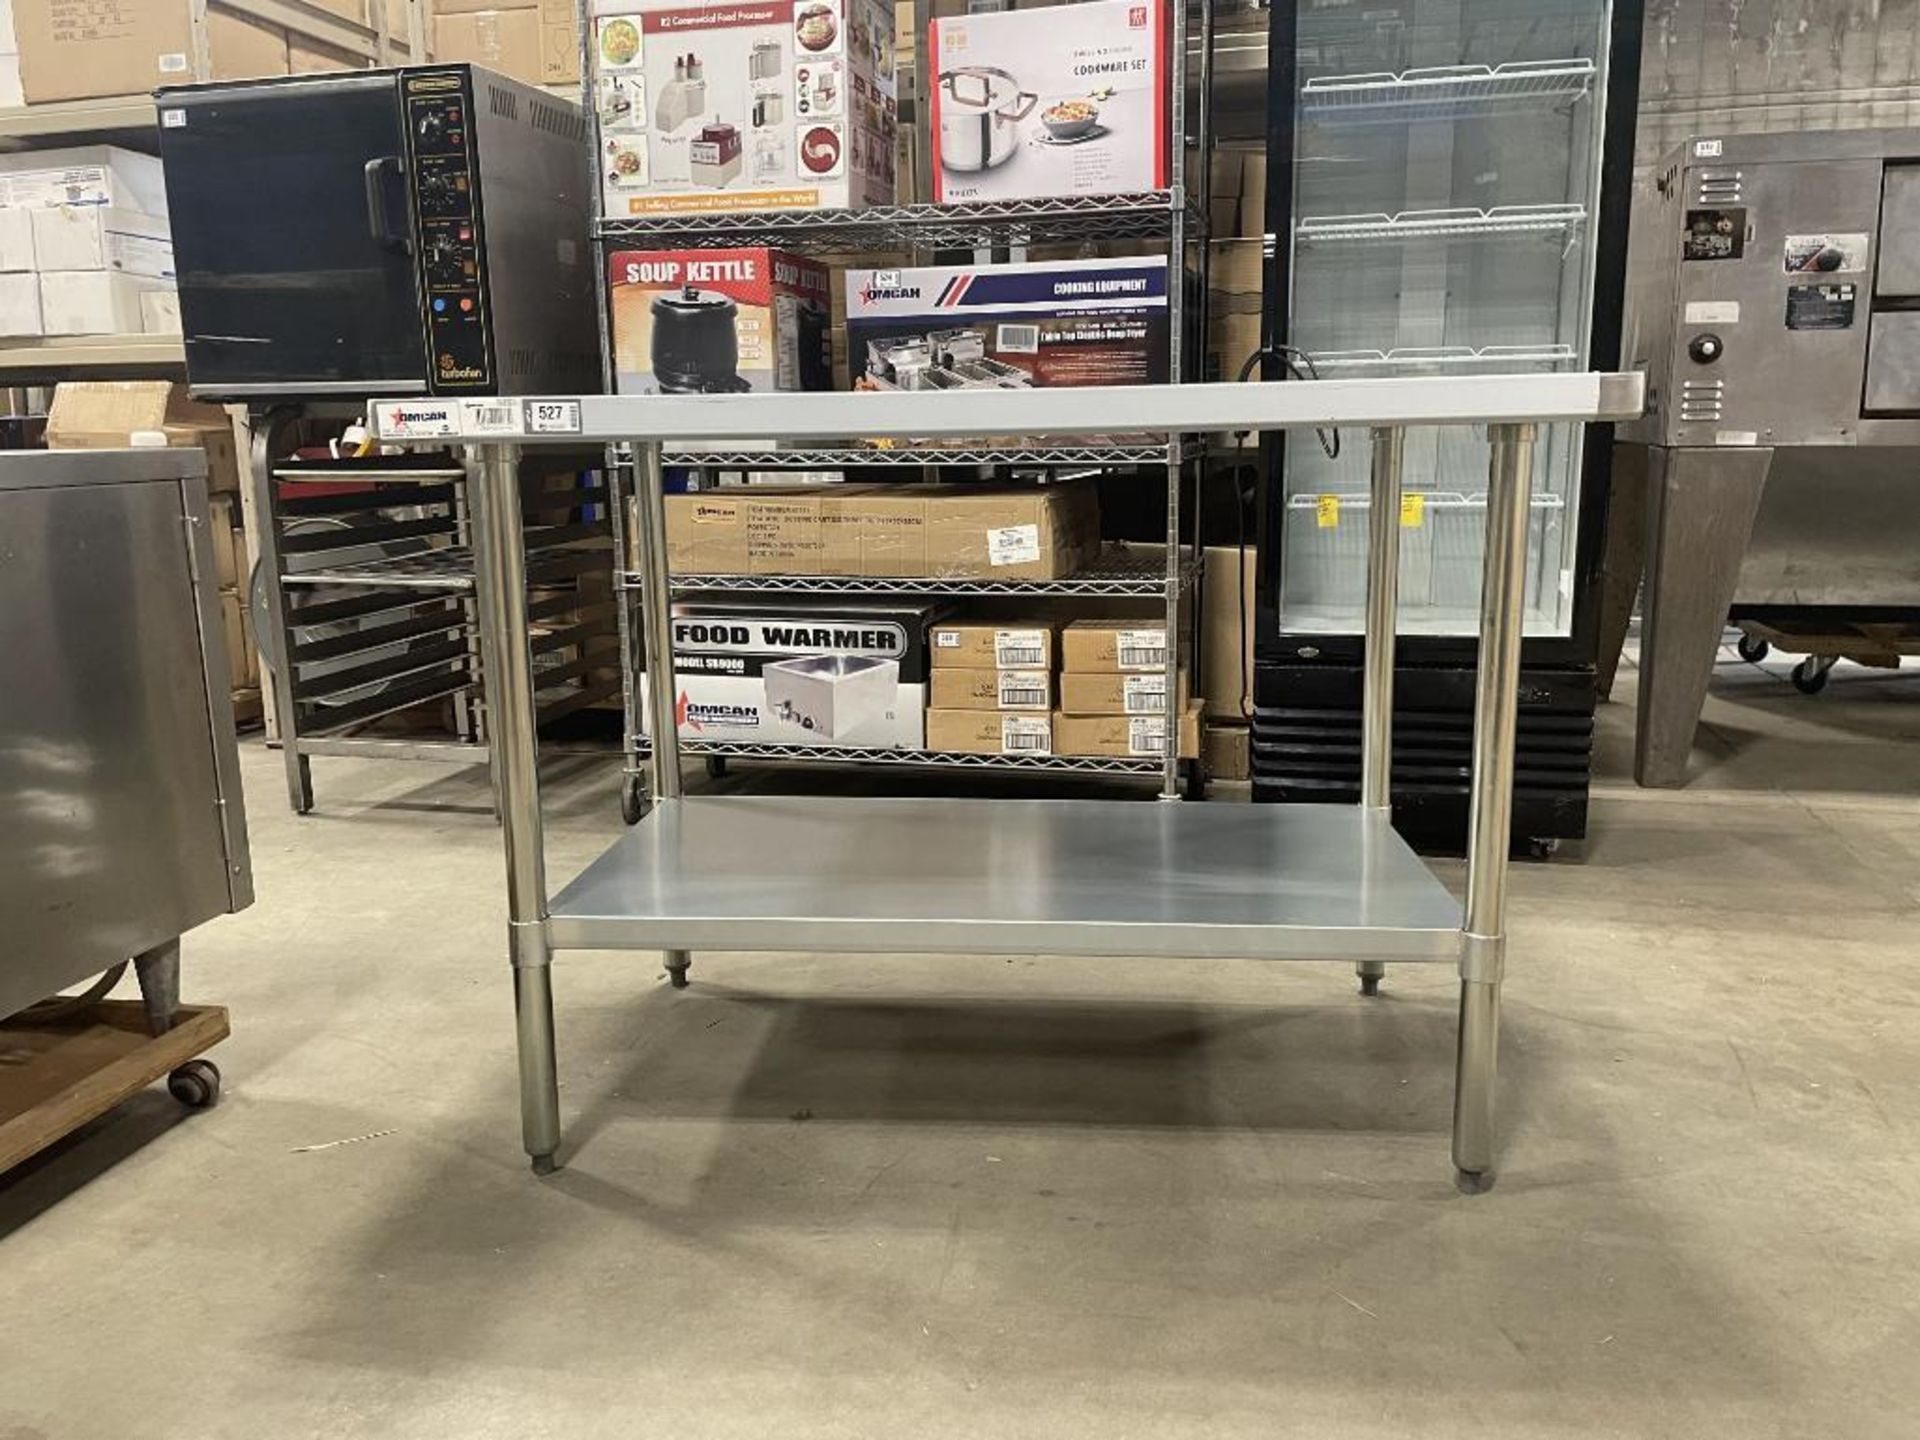 NEW 30" X 48" STAINLESS STEEL WORK TABLE, OMCAN 22073 - Image 4 of 4